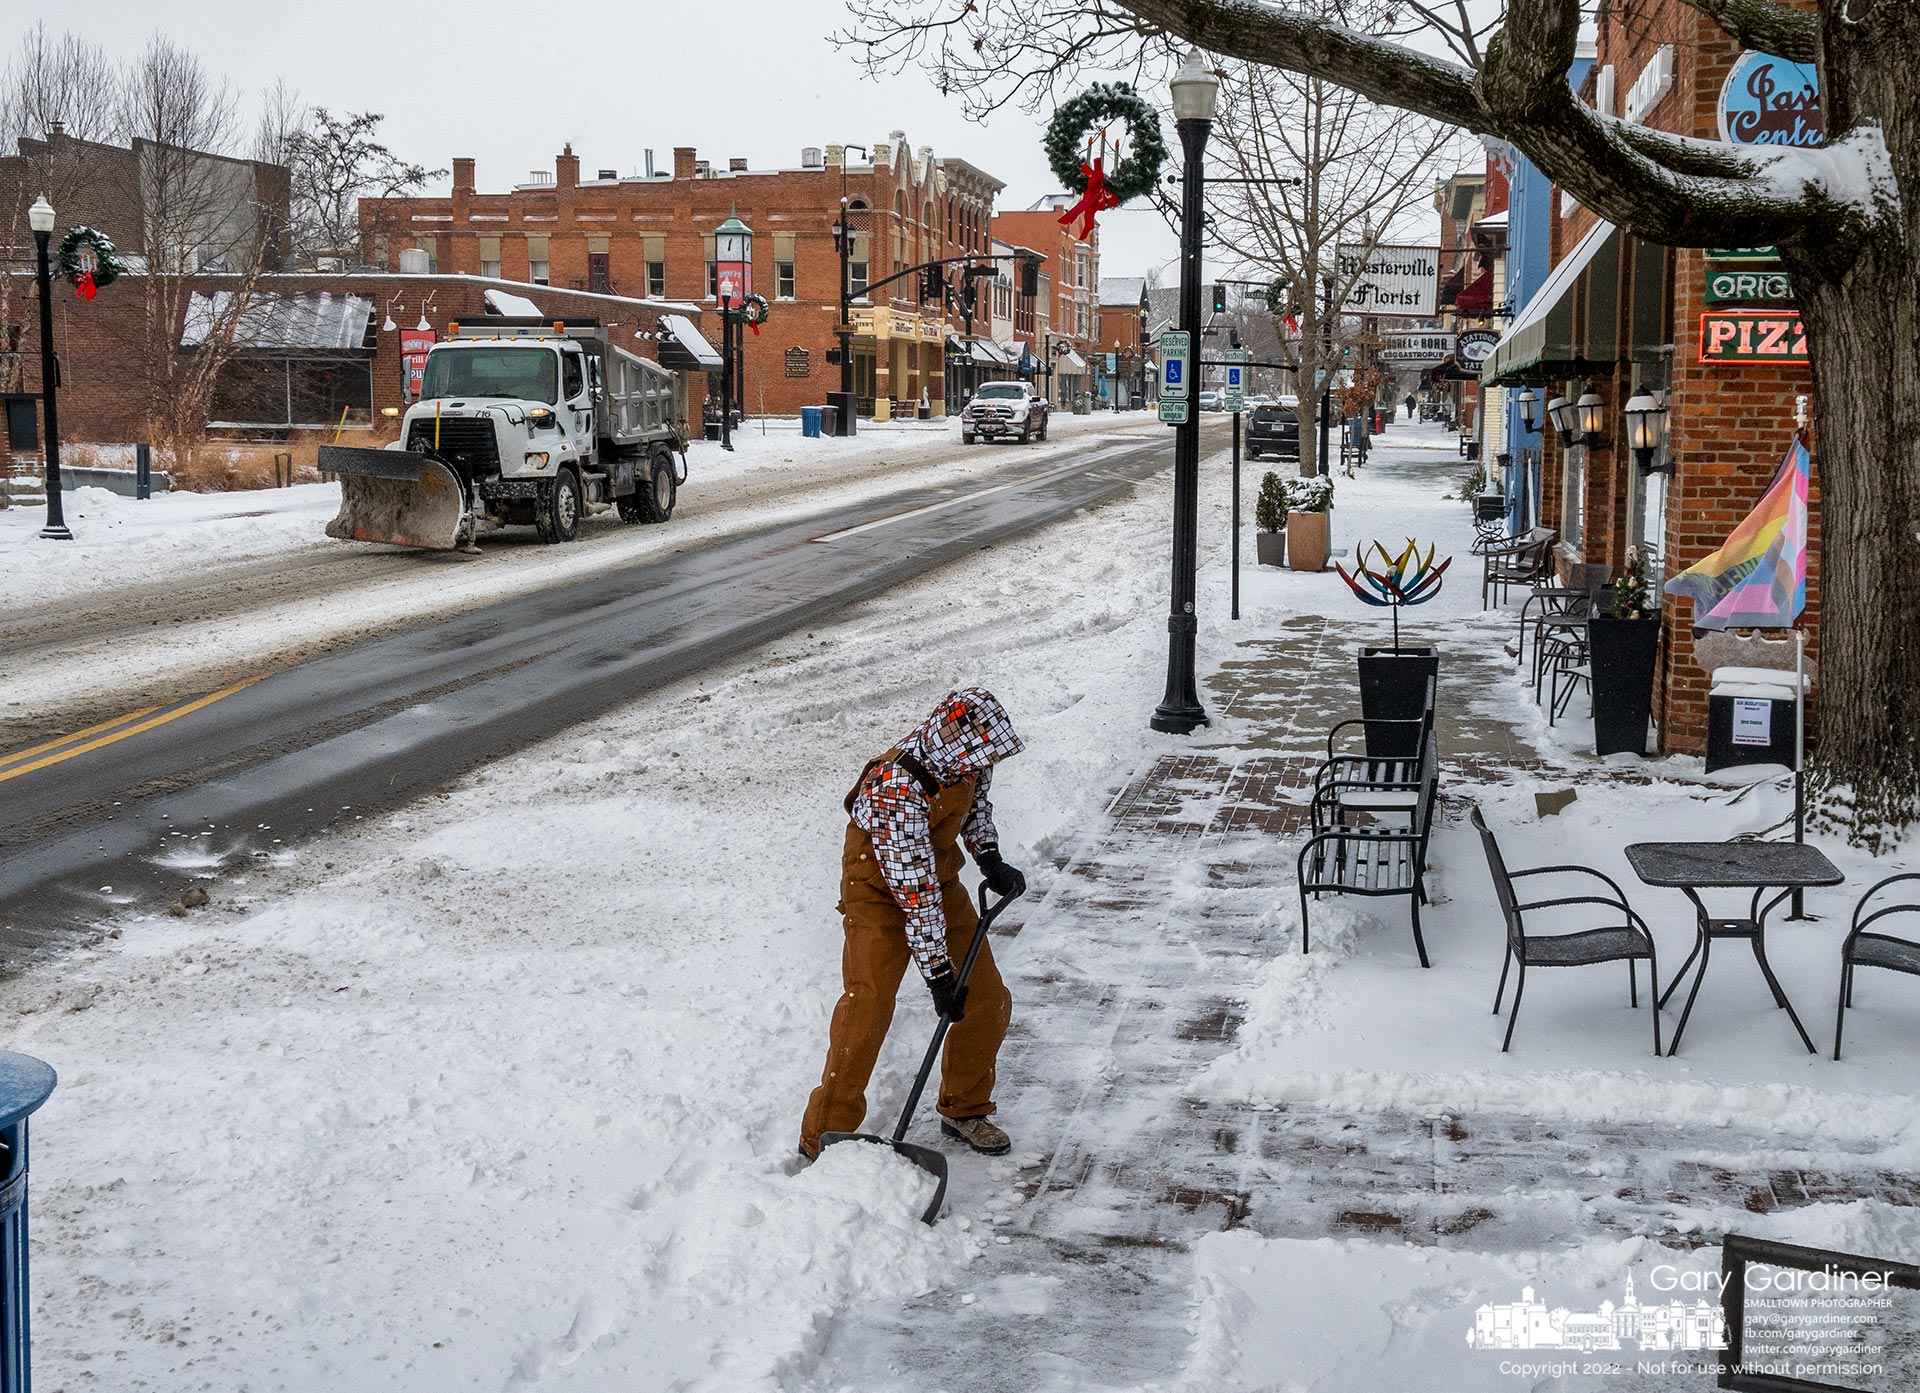 A Westerville city snow plow passes a man shoveling snow in front of Java Central after an overnight storm left several inches of snow and temperatures that dropped almost 50 degrees. My Final Photo for December 23, 2022.